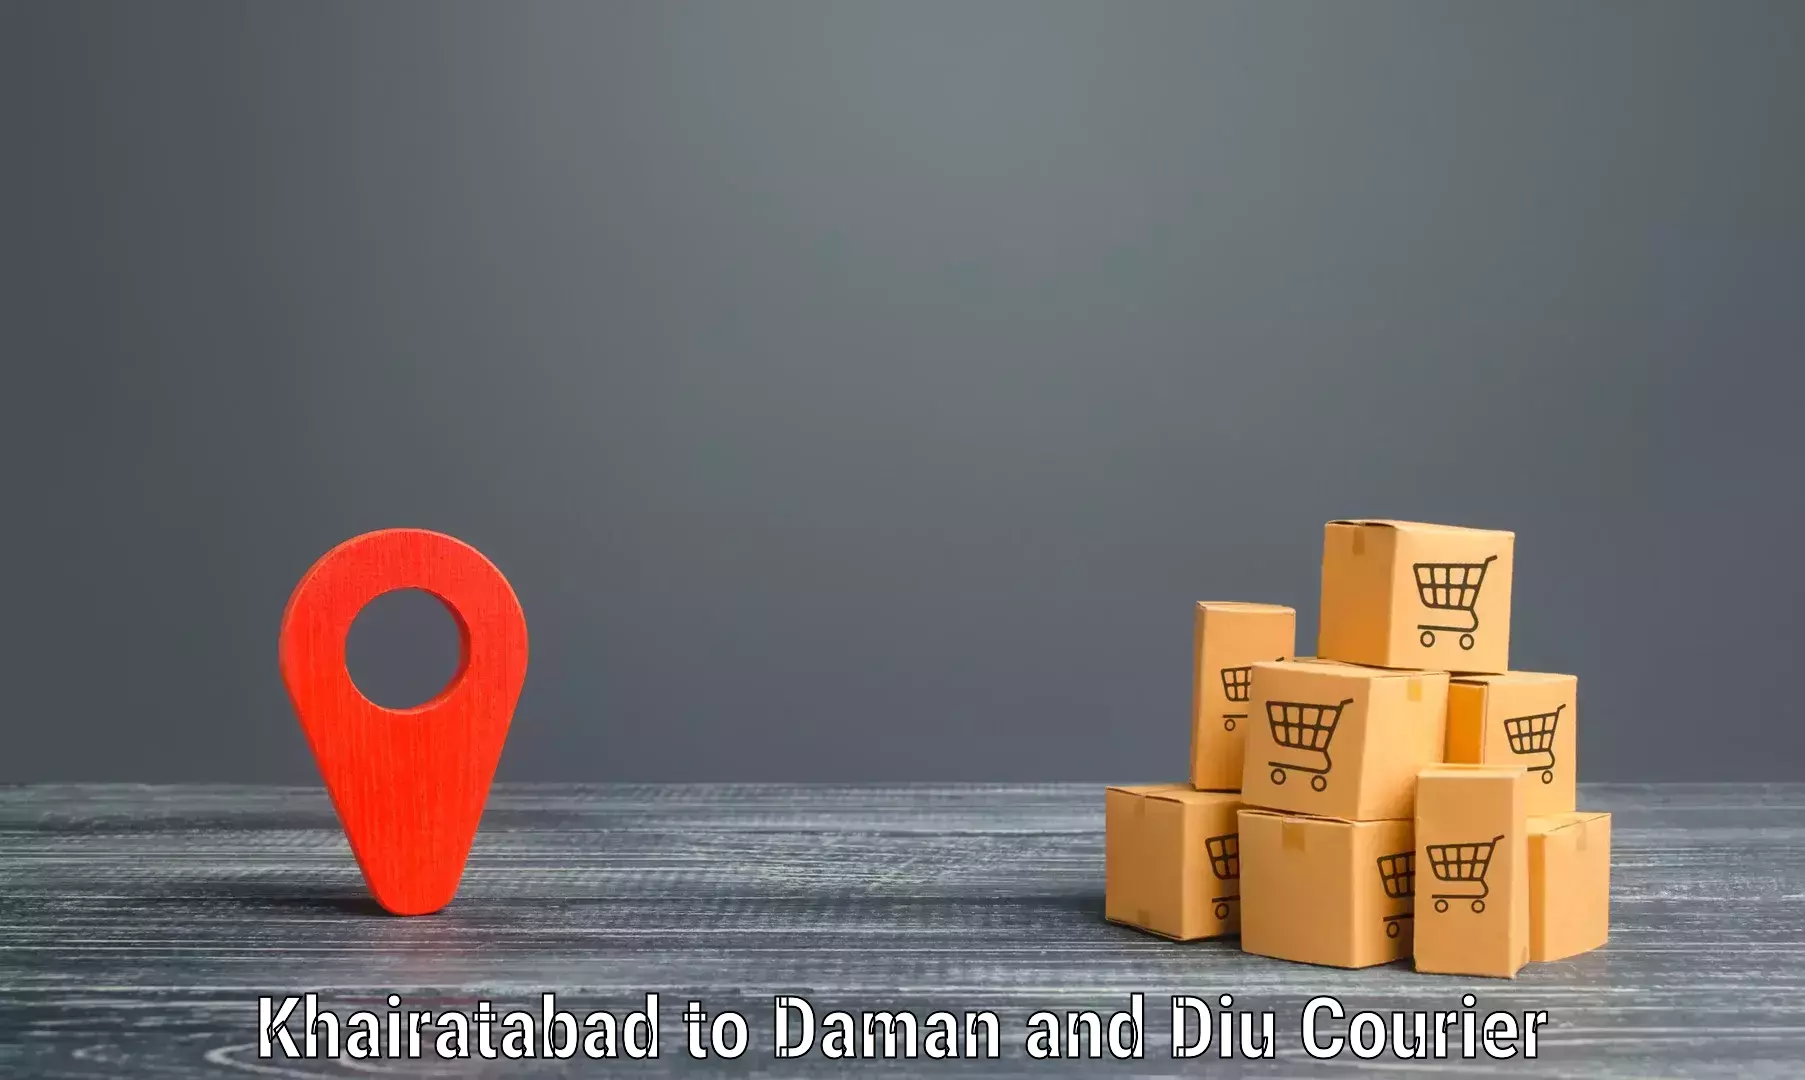 Fastest parcel delivery in Khairatabad to Diu